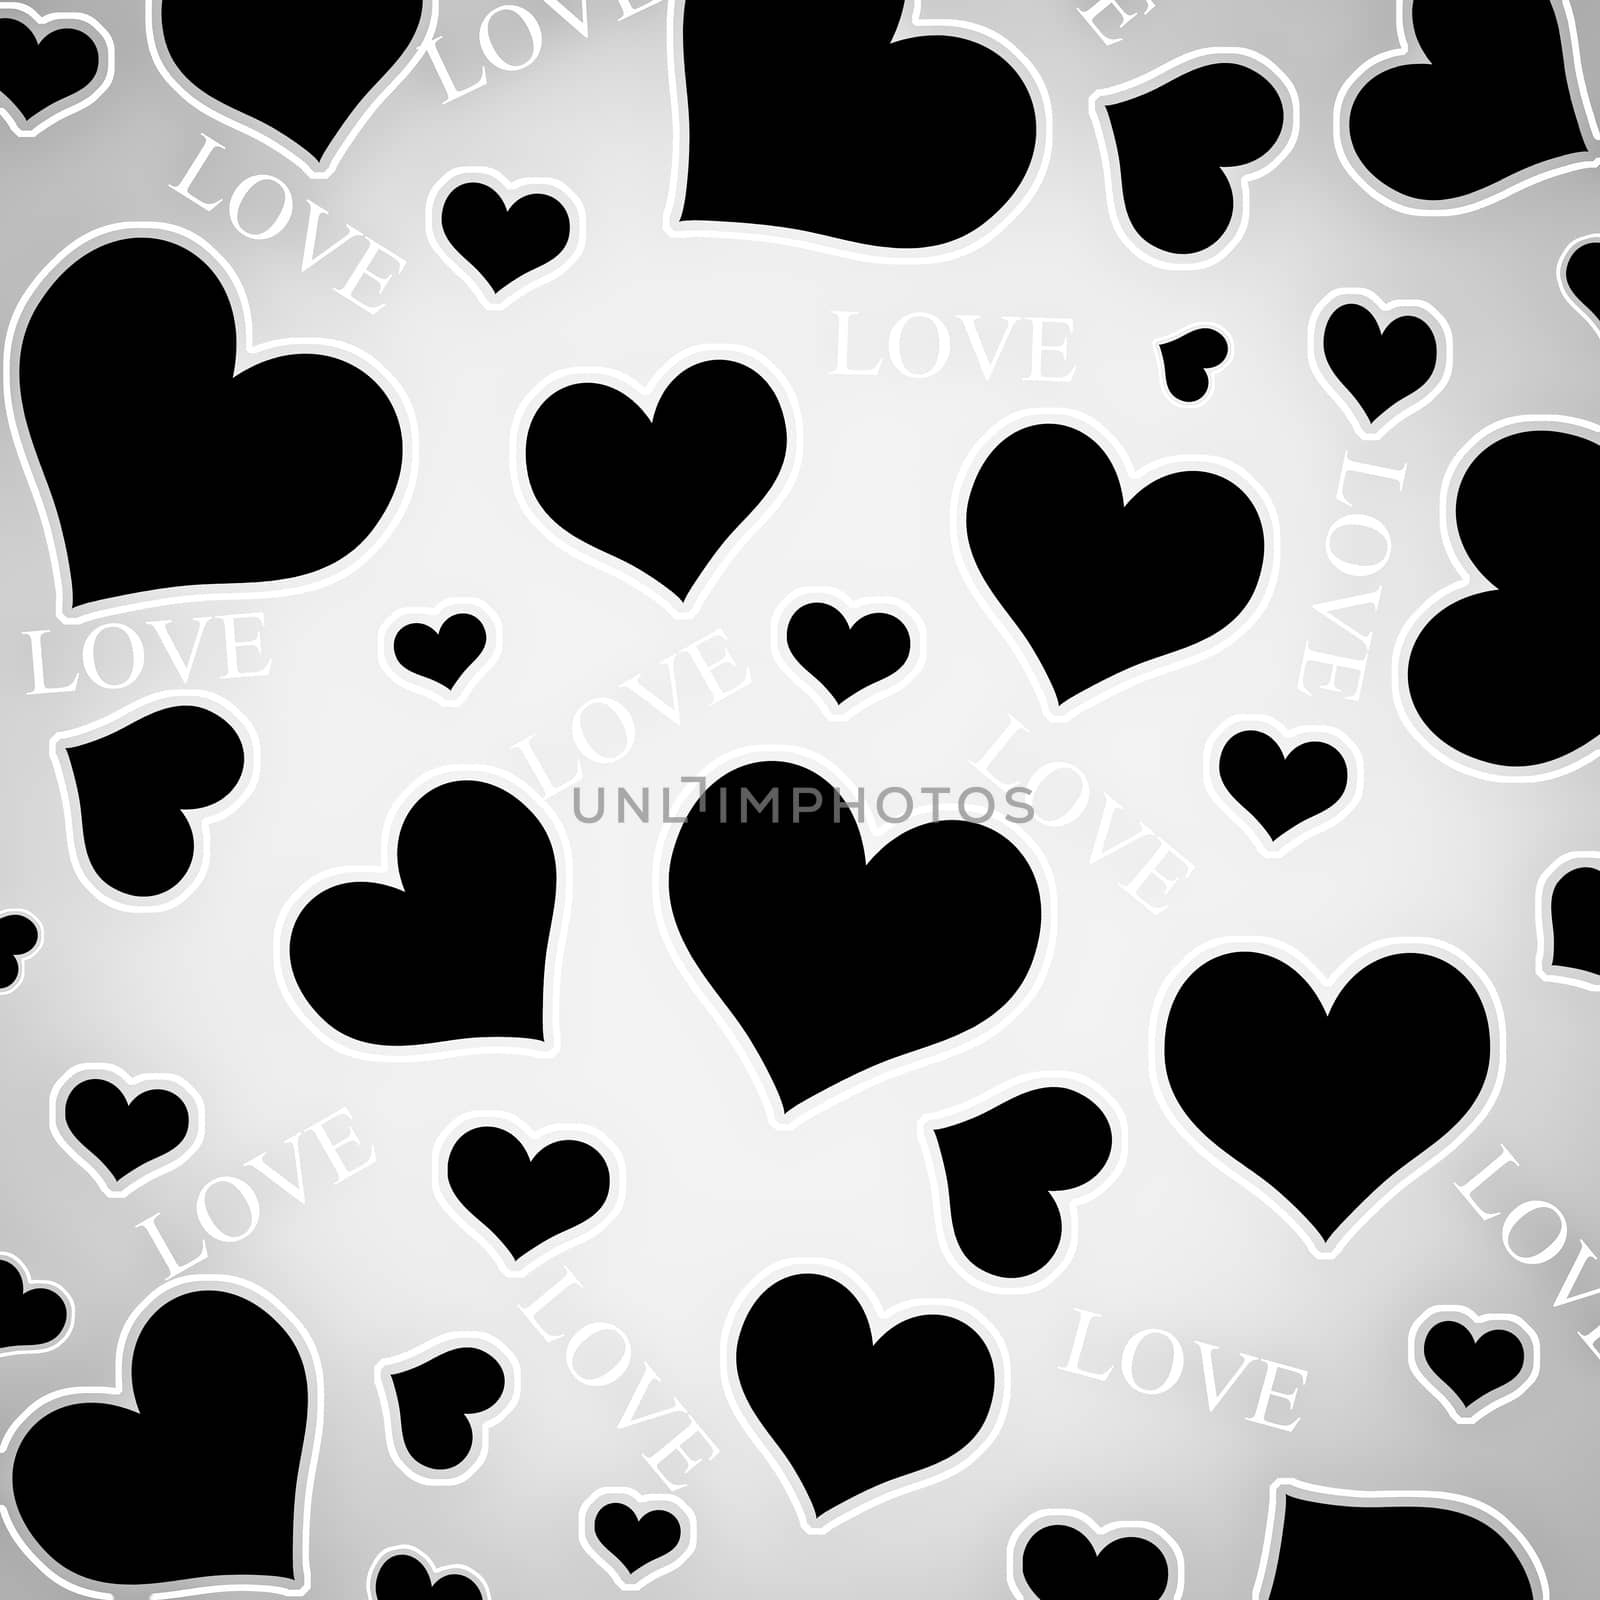 Black hearts and LOVE wording. by Gamjai